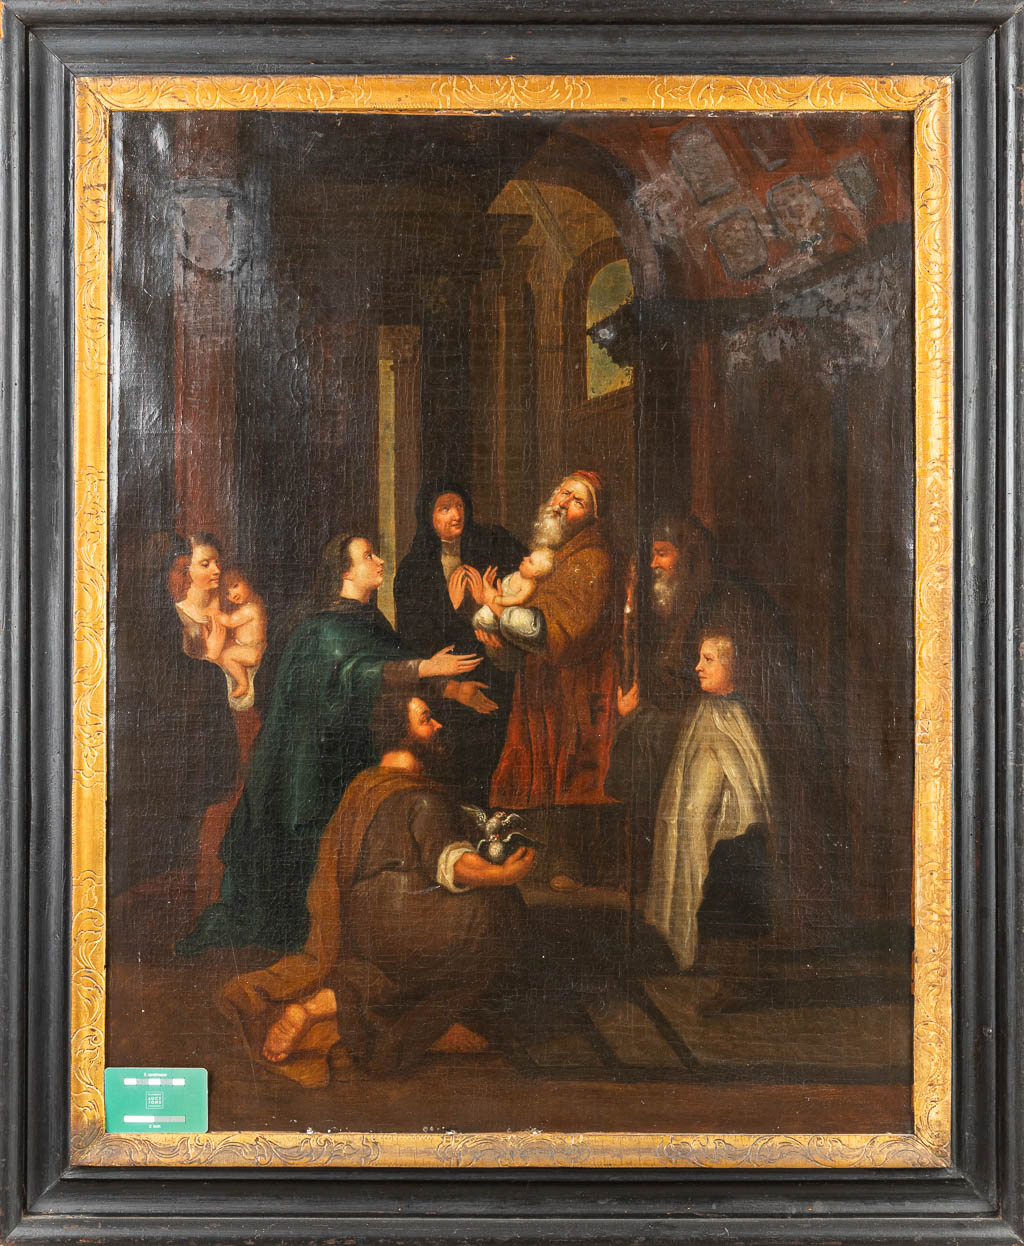 No signature found, an antique painting 